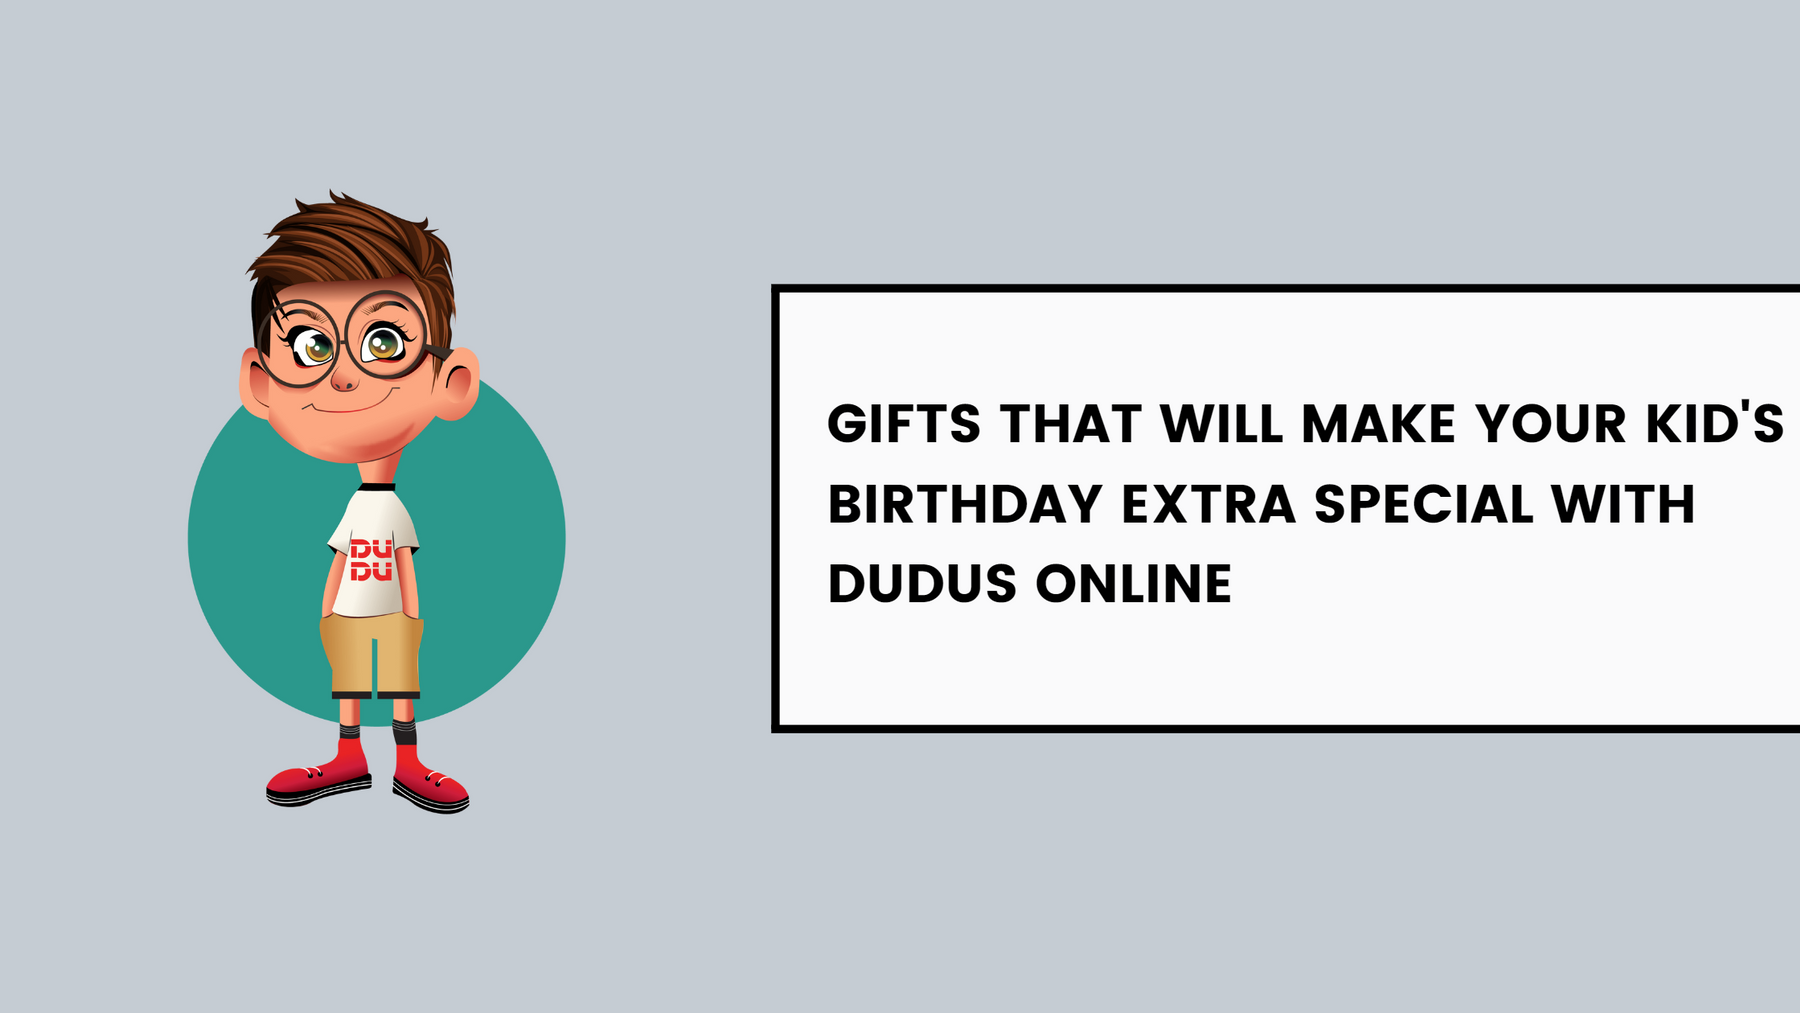 Gifts That Will Make Your Kid's Birthday Extra Special With Dudus Online